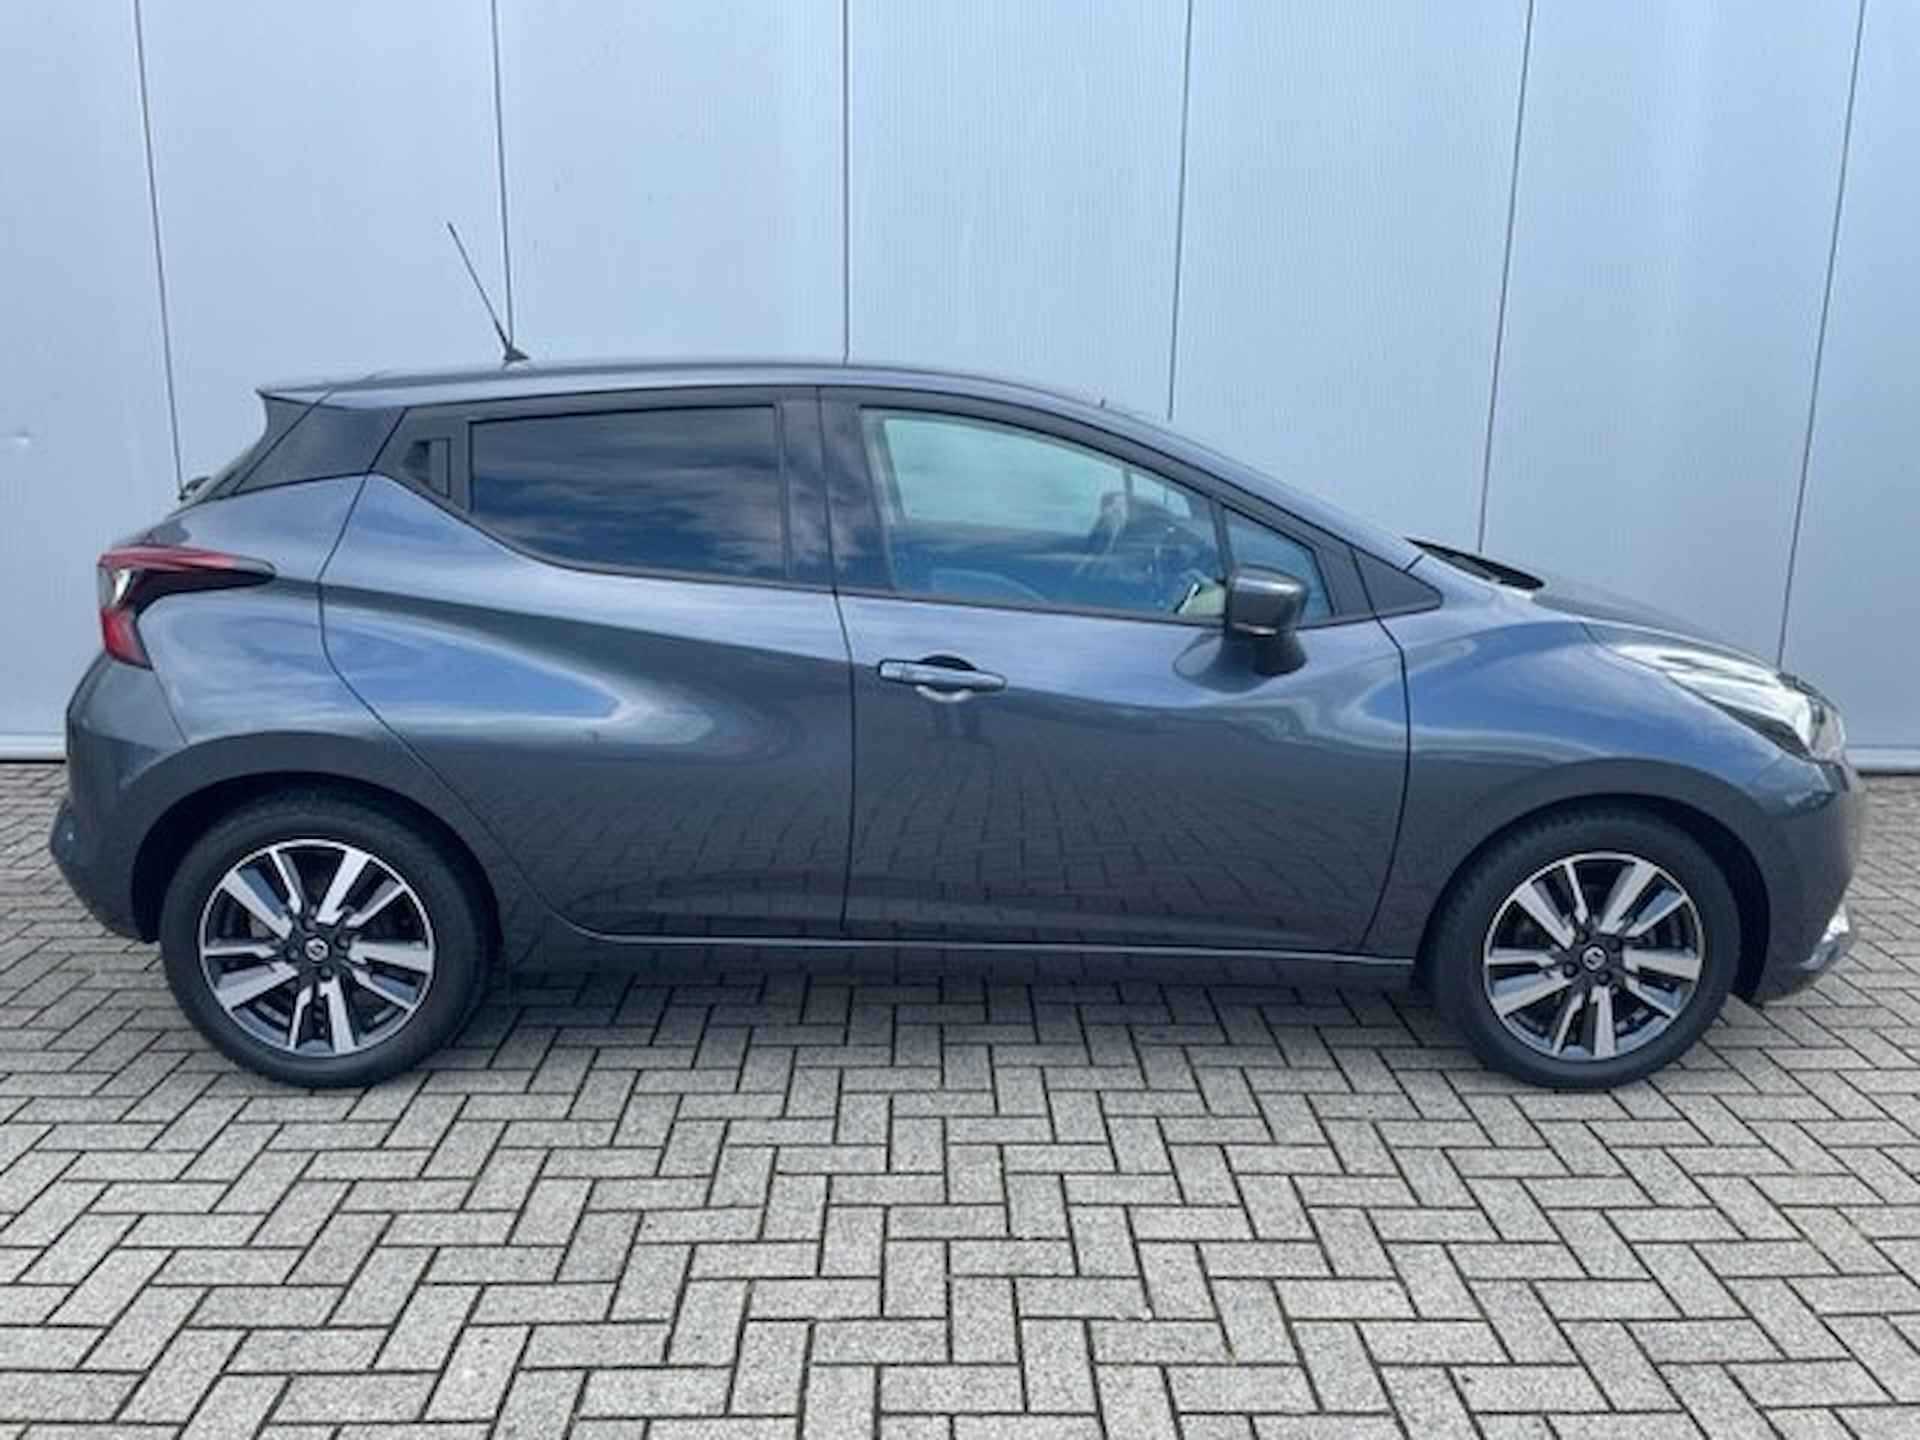 Nissan Micra 1.0 IG-T N-Connecta Navigatie, Climate Control, Cruise Control, 16"Lm, Achteruitrijcamera - 3/19